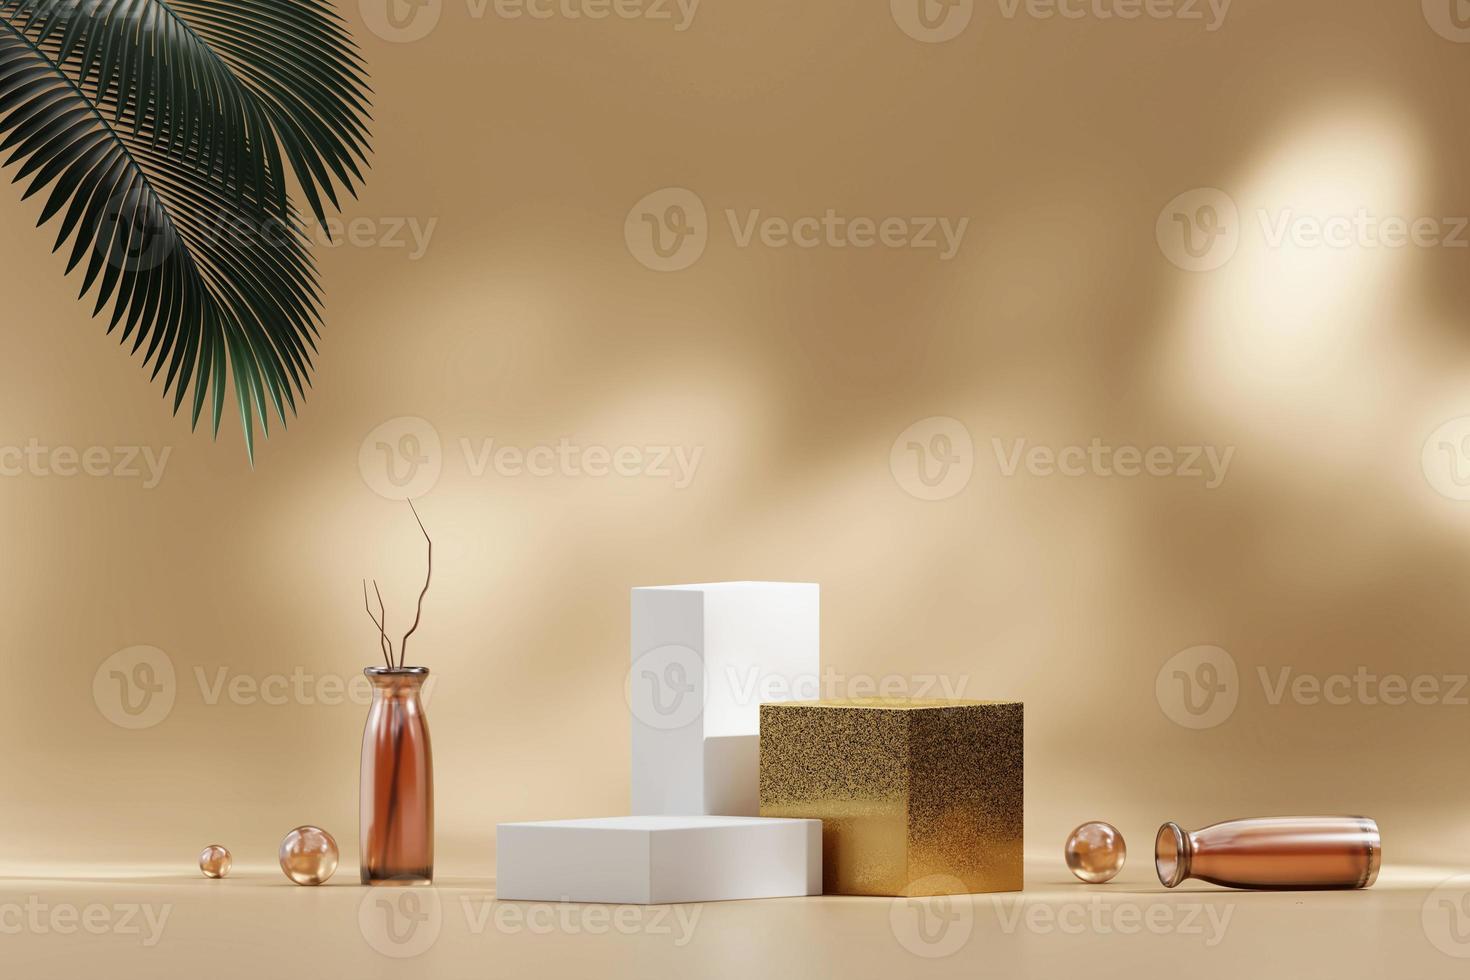 Abstract platform podium showcase for product display with palm leaves 3d render photo